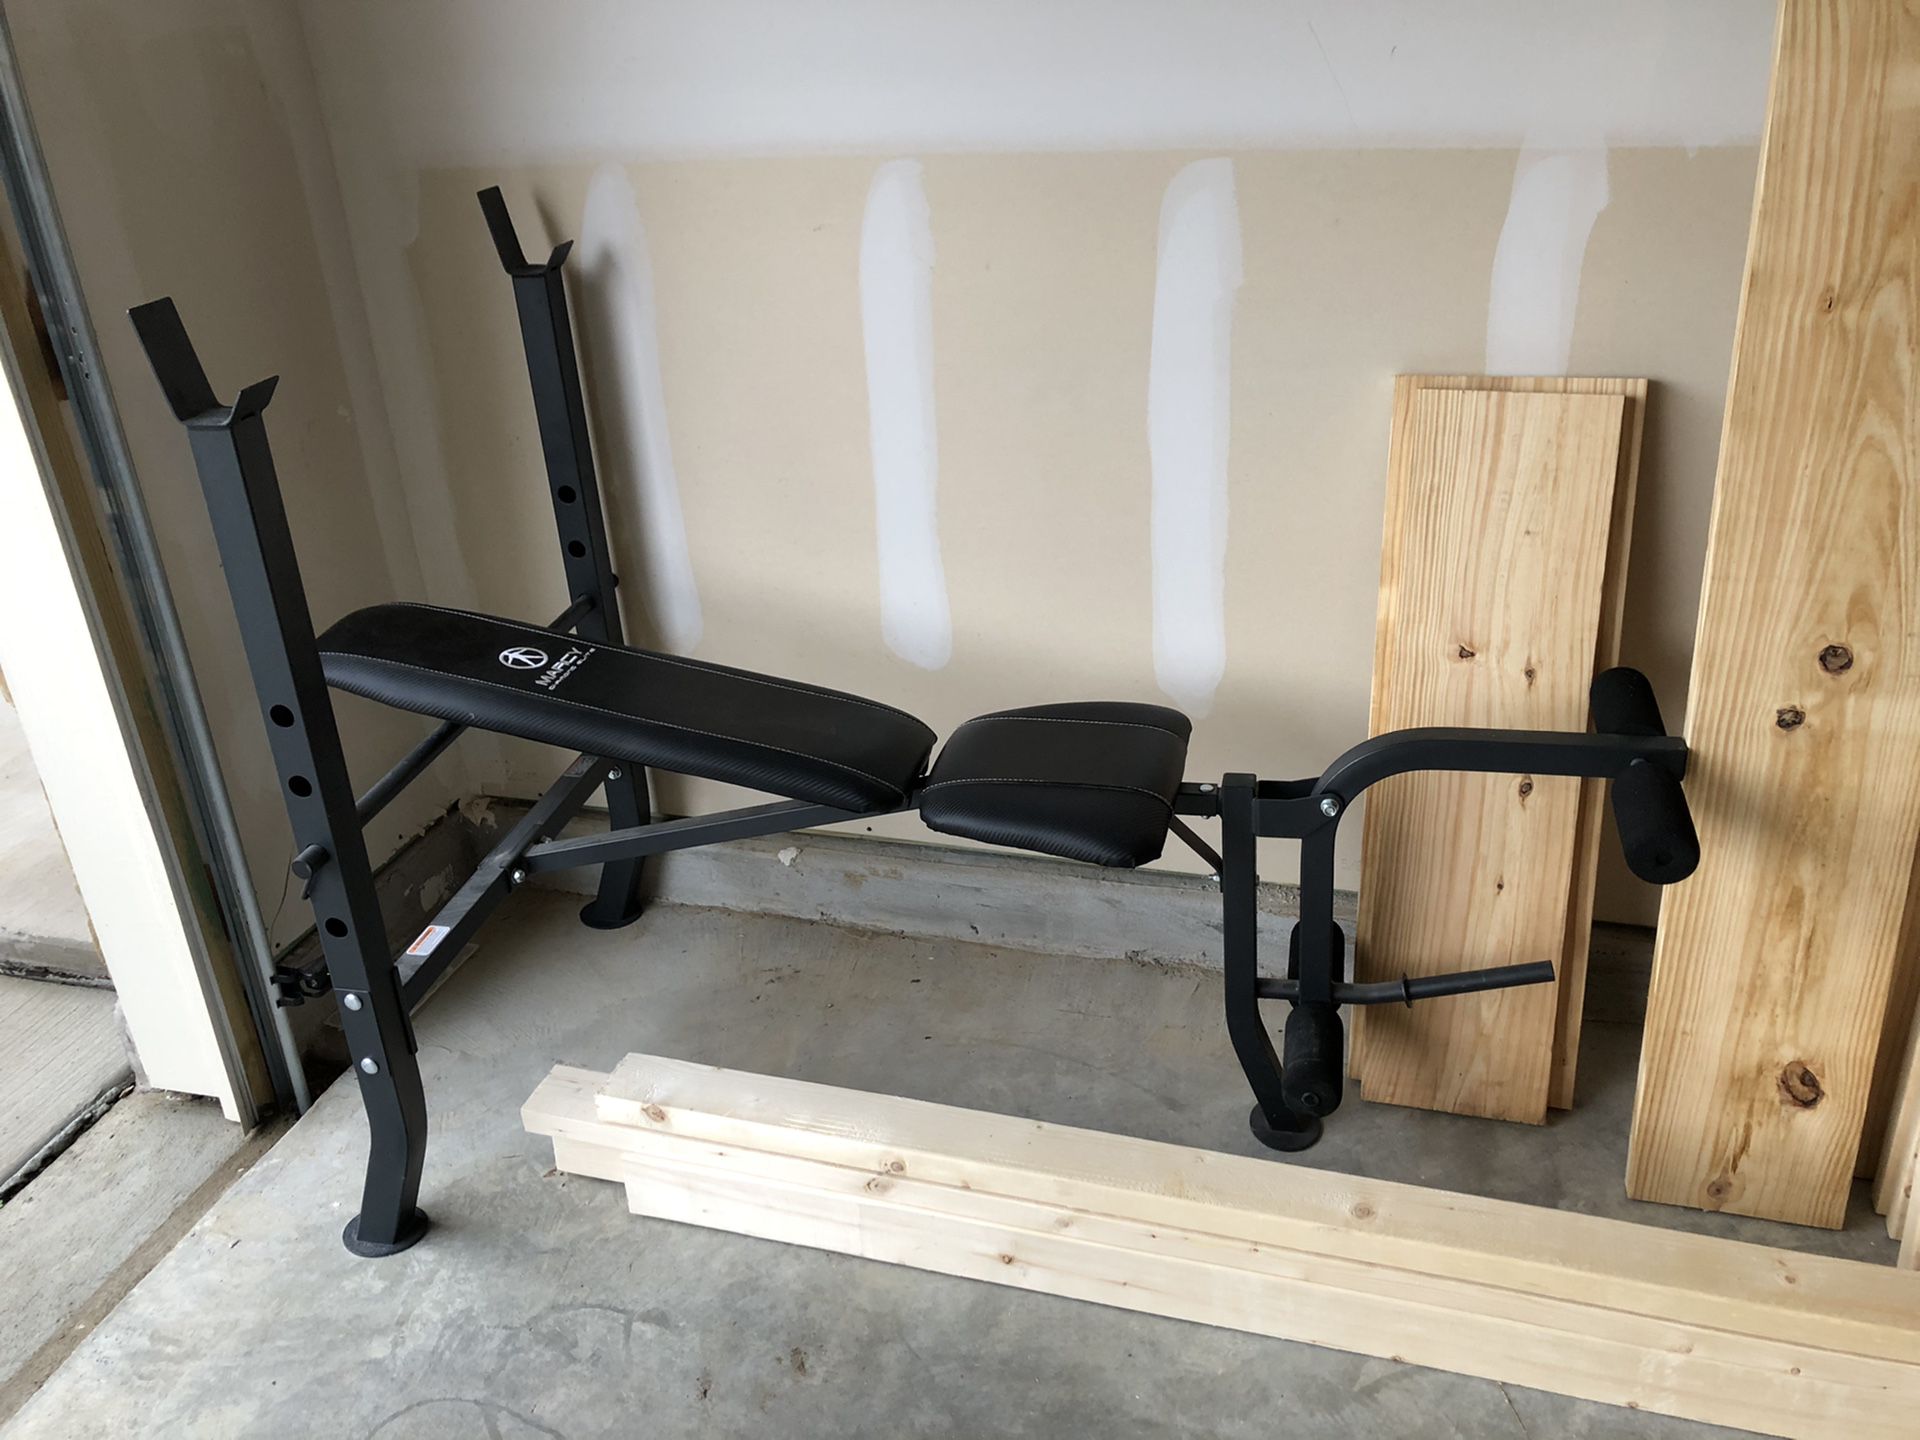 Marcy workout bench with weights